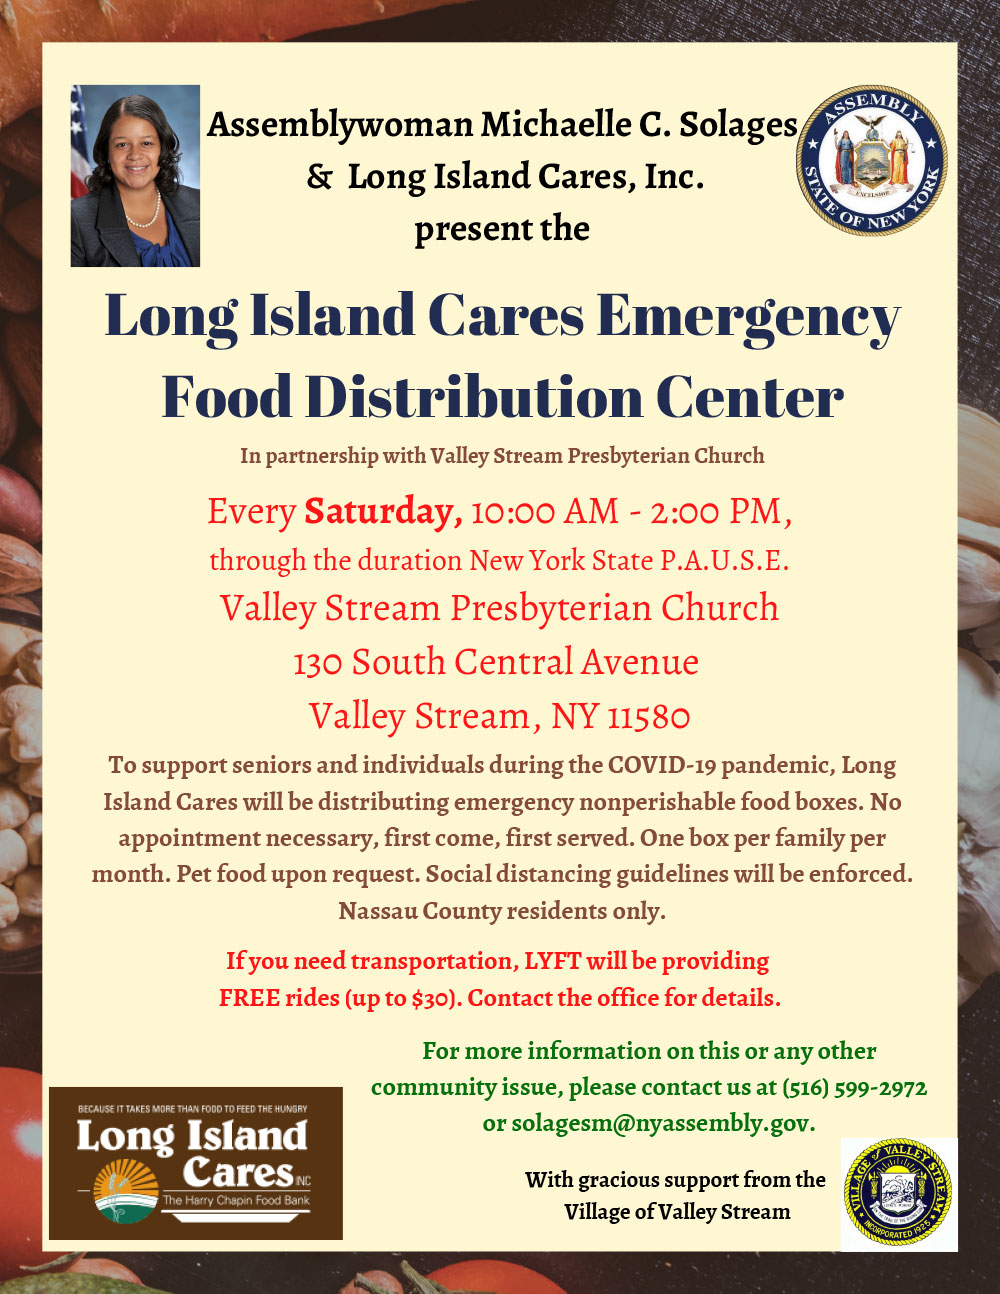 In partnership with Long Island Cares, Inc. and Valley Stream Presbyterian Church, Assw. Solages has established an emergency food distribution site for residents who have been affected by the ongoing COVID-19 pandemic in Valley Stream.